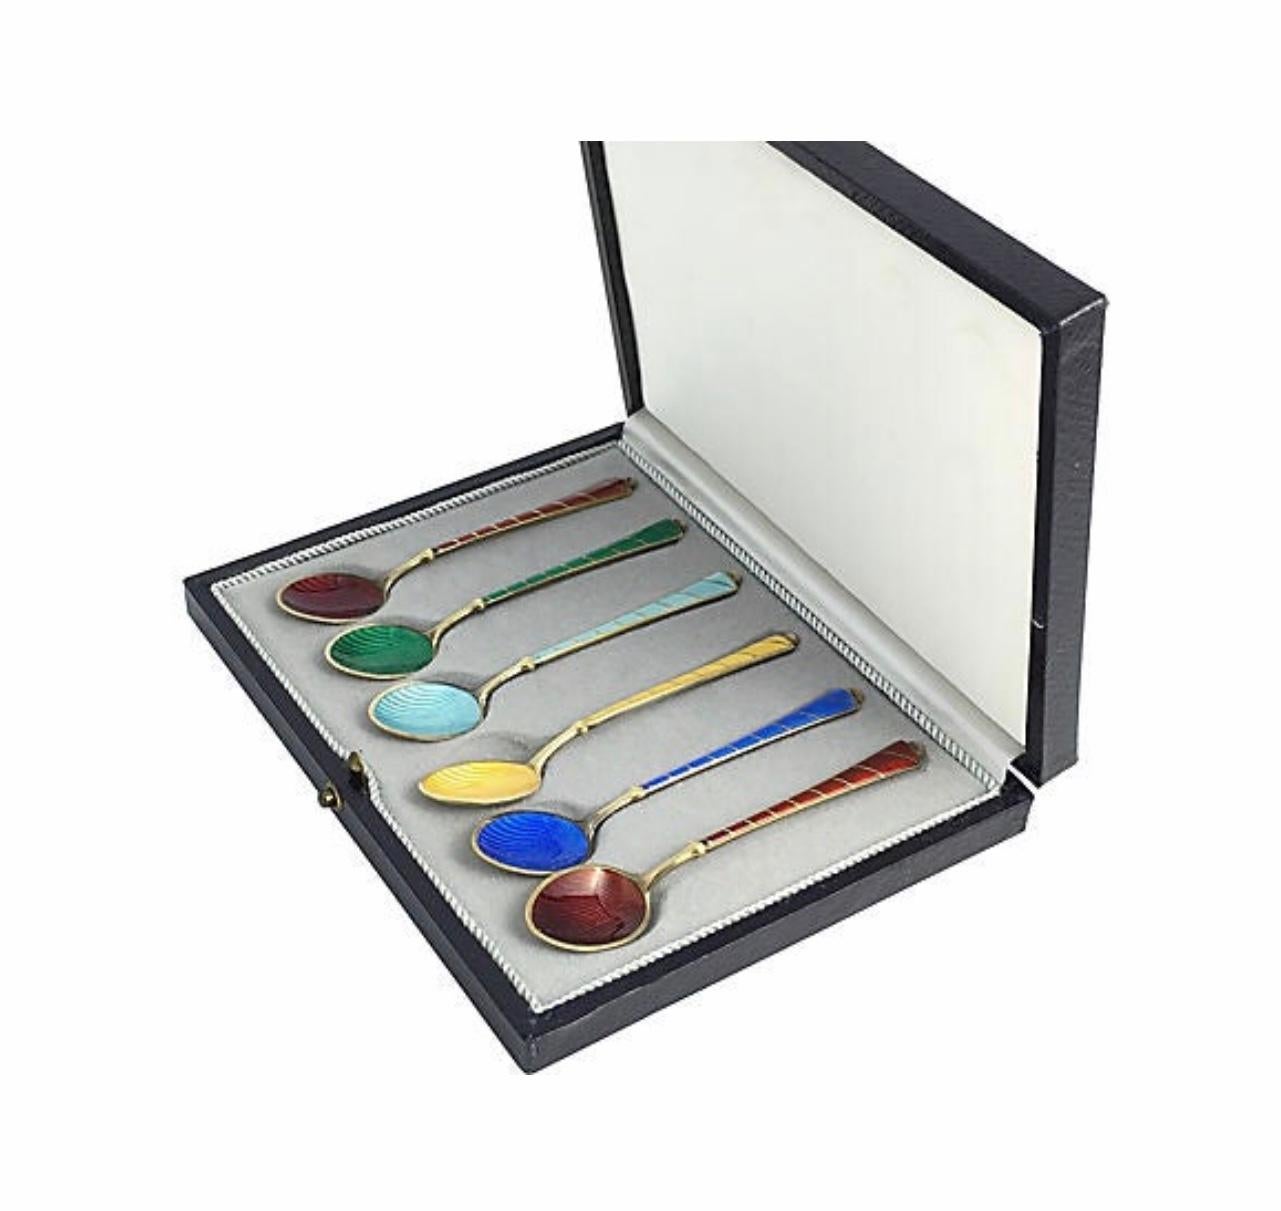 Boxed set of 6 Egon Lauridsen (ELa Denmark) gilded silver & enamel demitasse spoons manufactured in Copenhagen between 1936-1966. These stunning gilt sterling silver coffee spoons are enameled in vibrant colors. (Both the stems and the bowls are